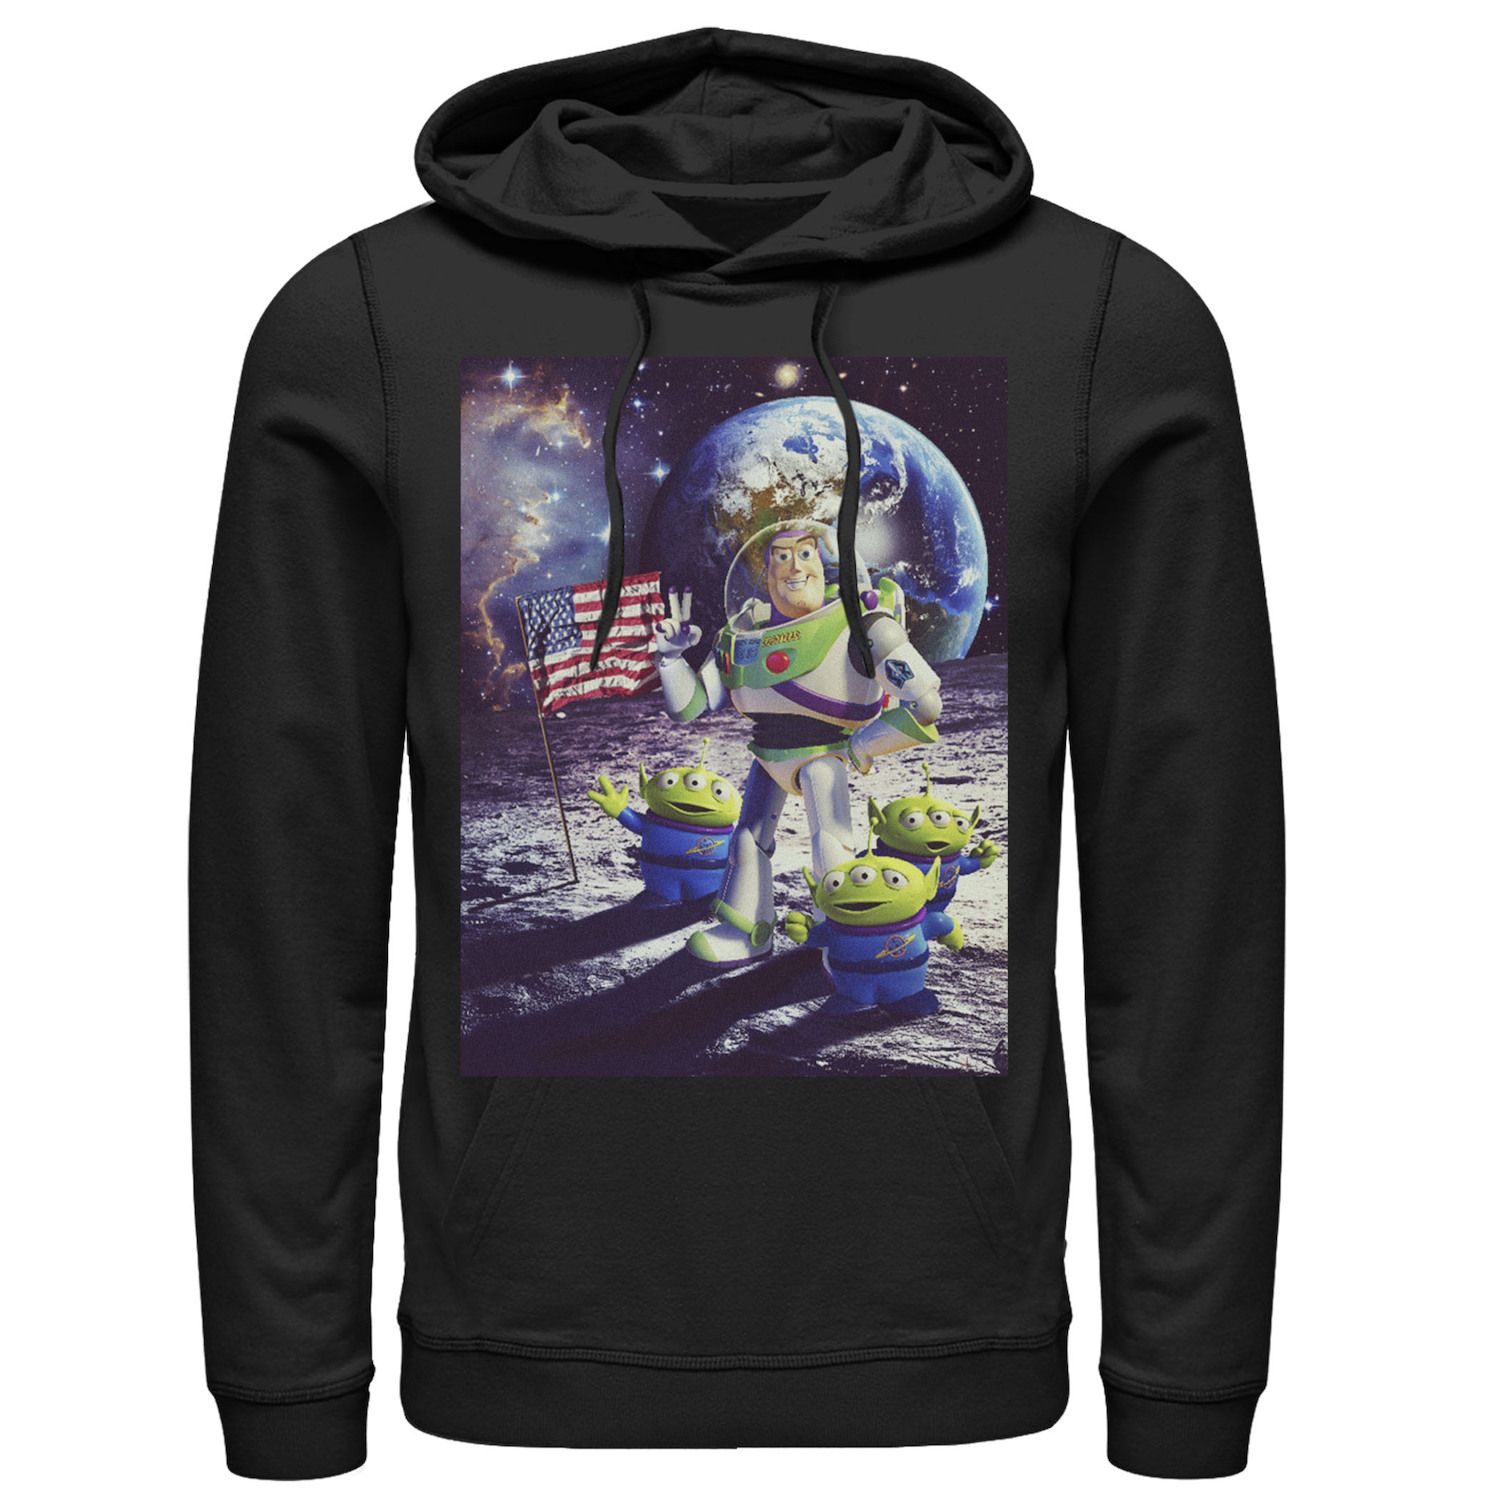 Image for Disney / Pixar Men's Toy Story Buzz and Aliens On The Moon Photo Hoodie at Kohl's.